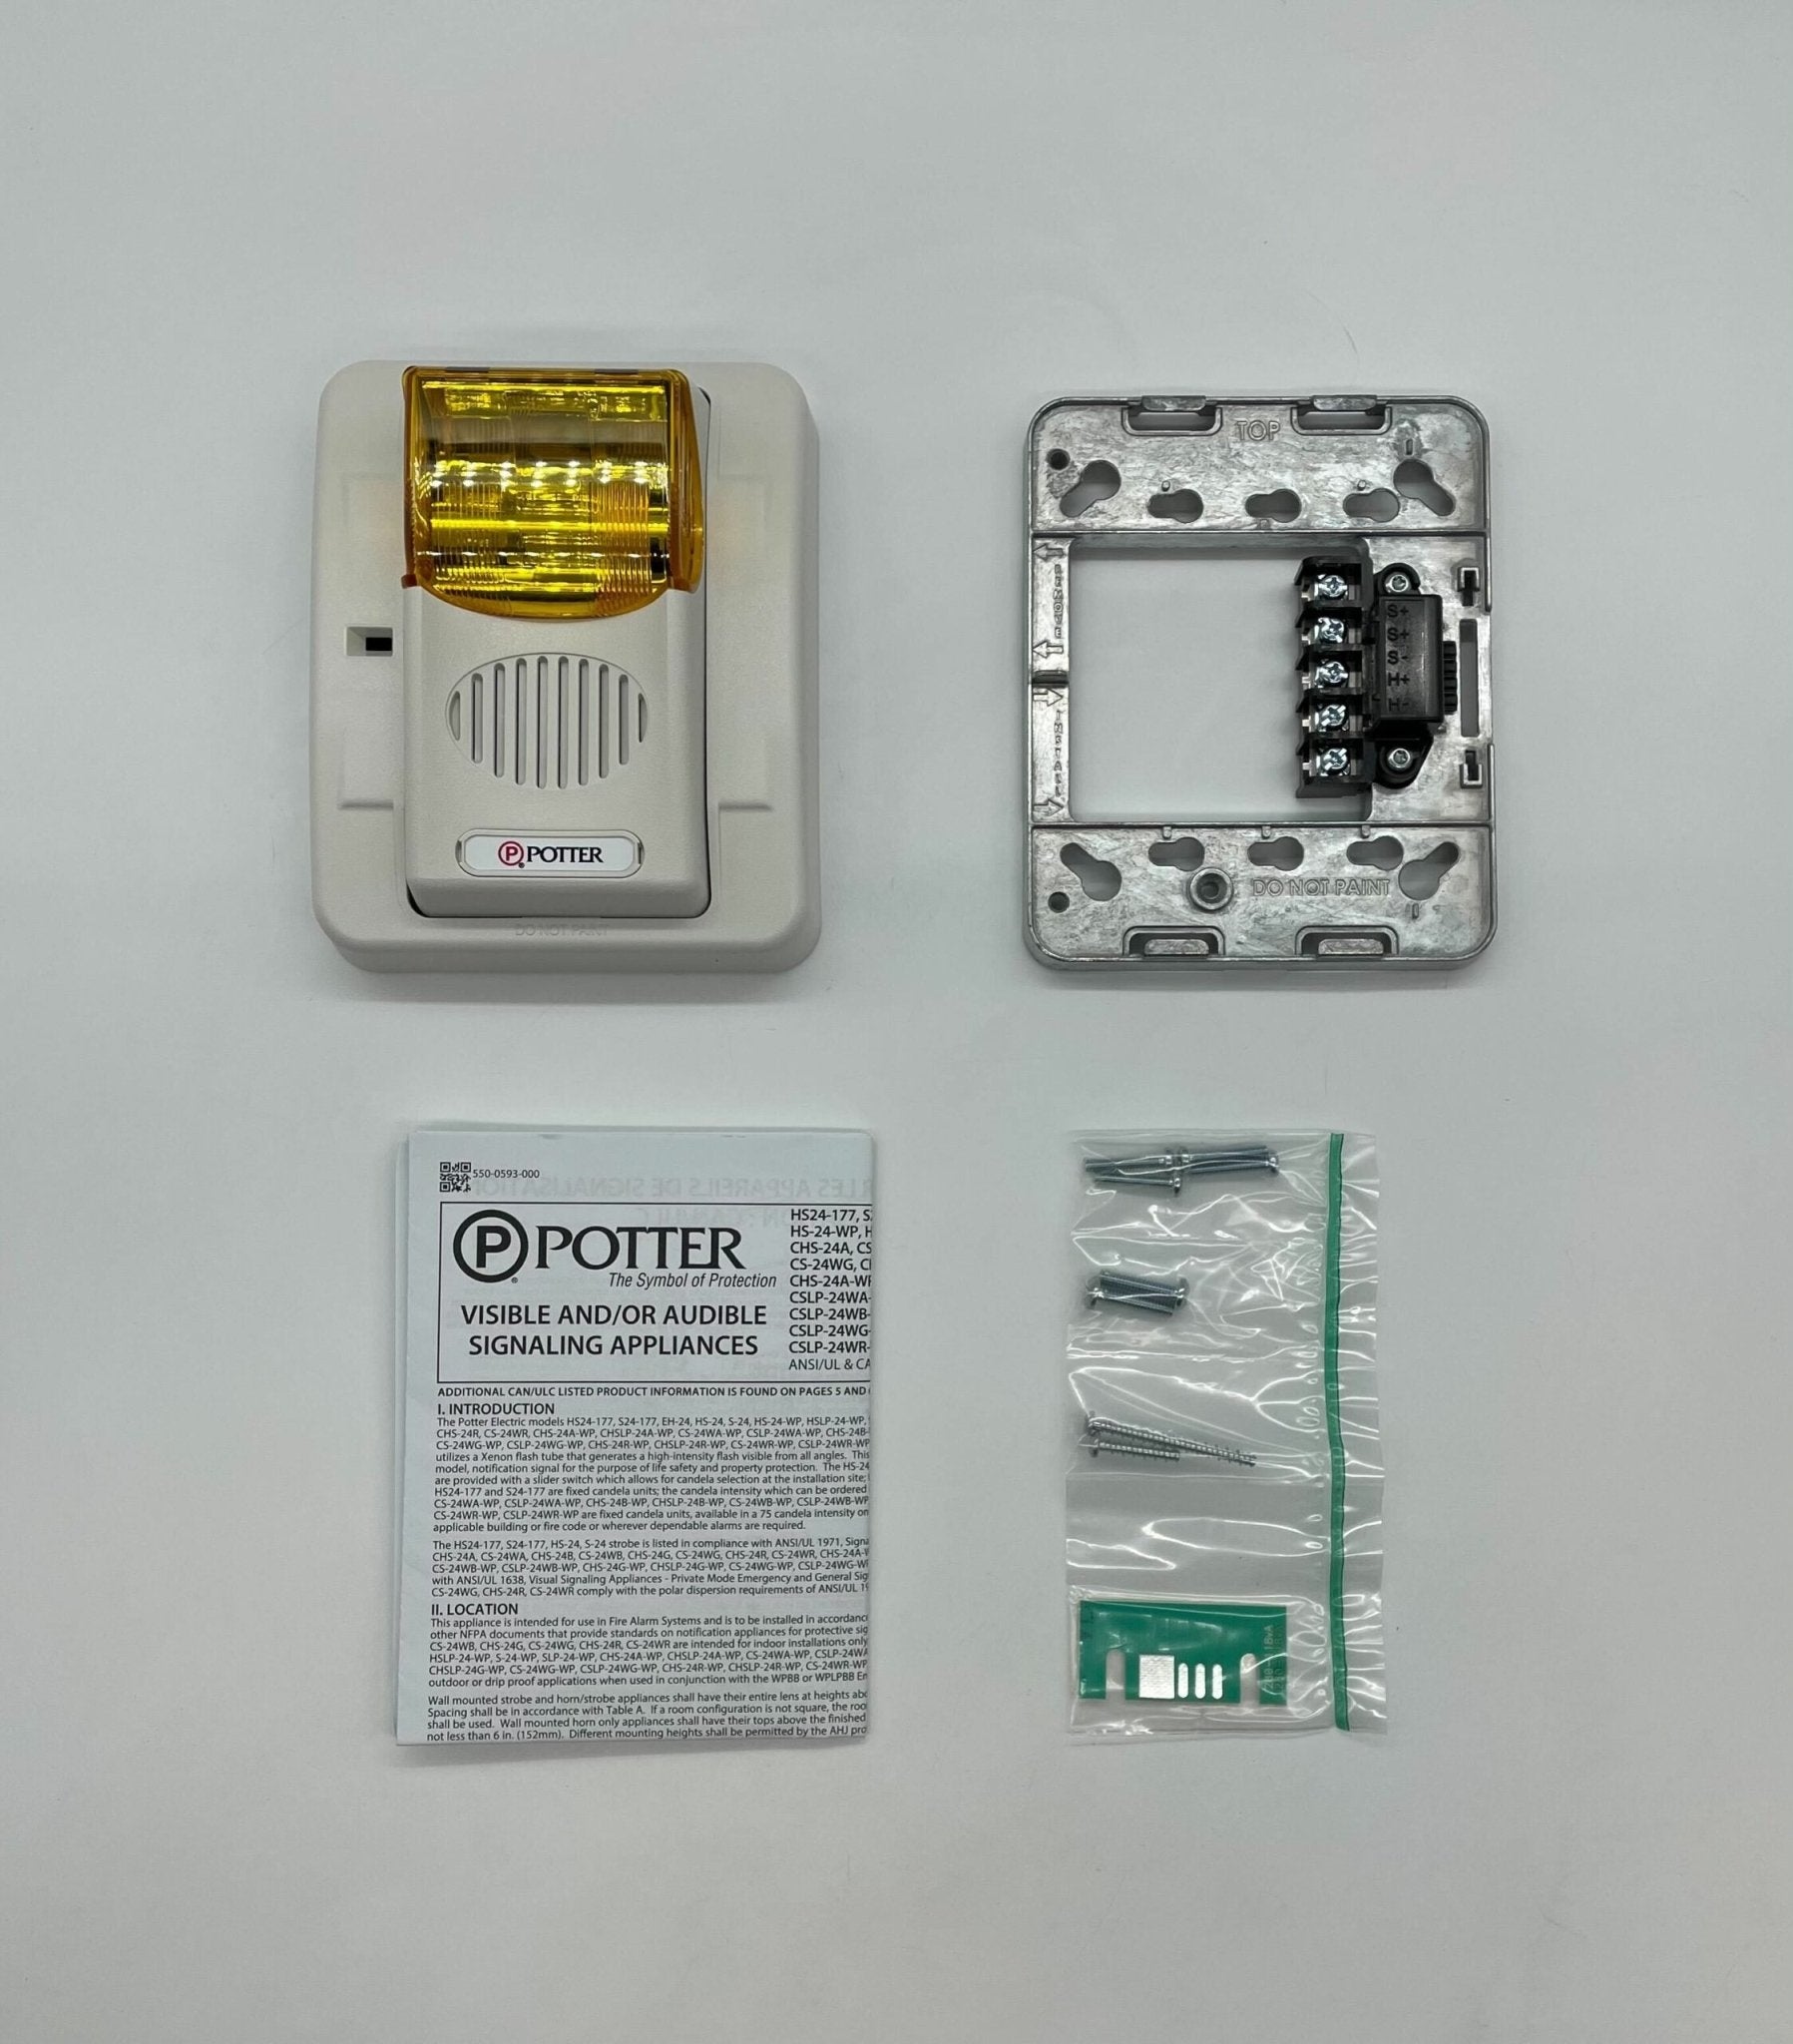 Potter CHS-24AW - The Fire Alarm Supplier